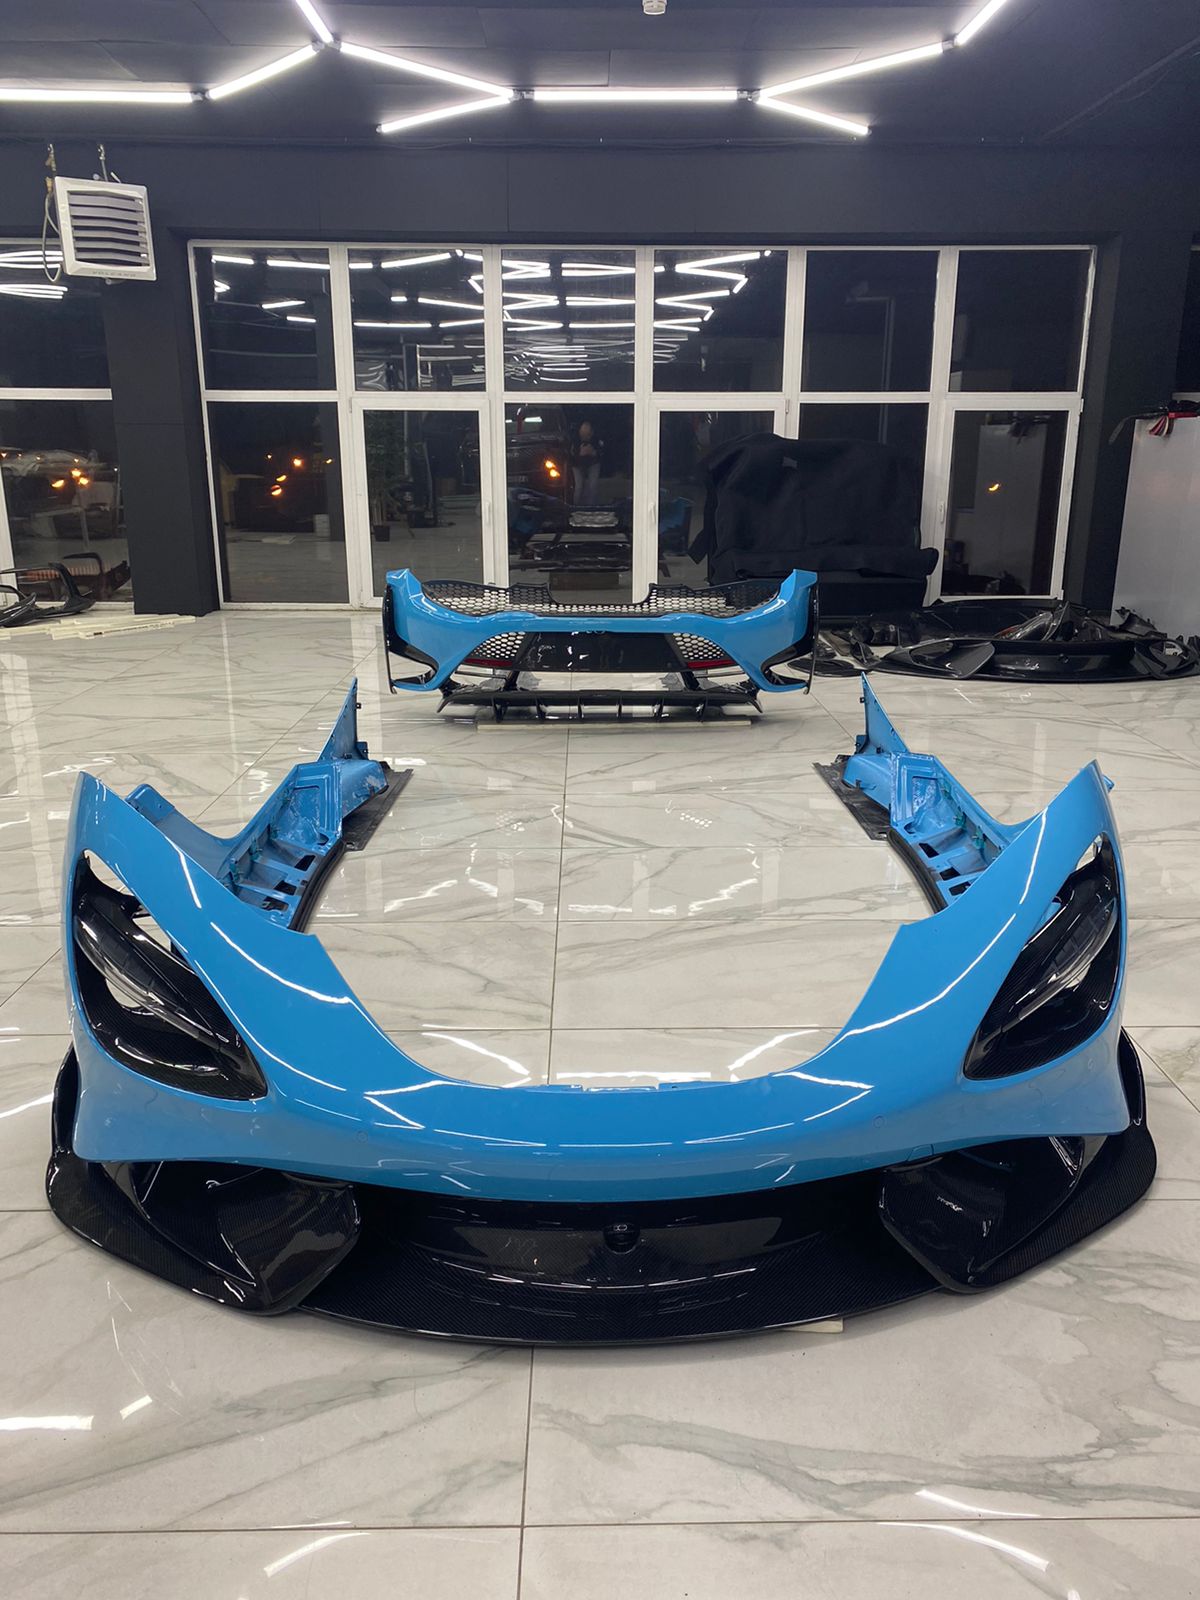 Check our price and buy Renegade Design body kit for McLaren 765LT